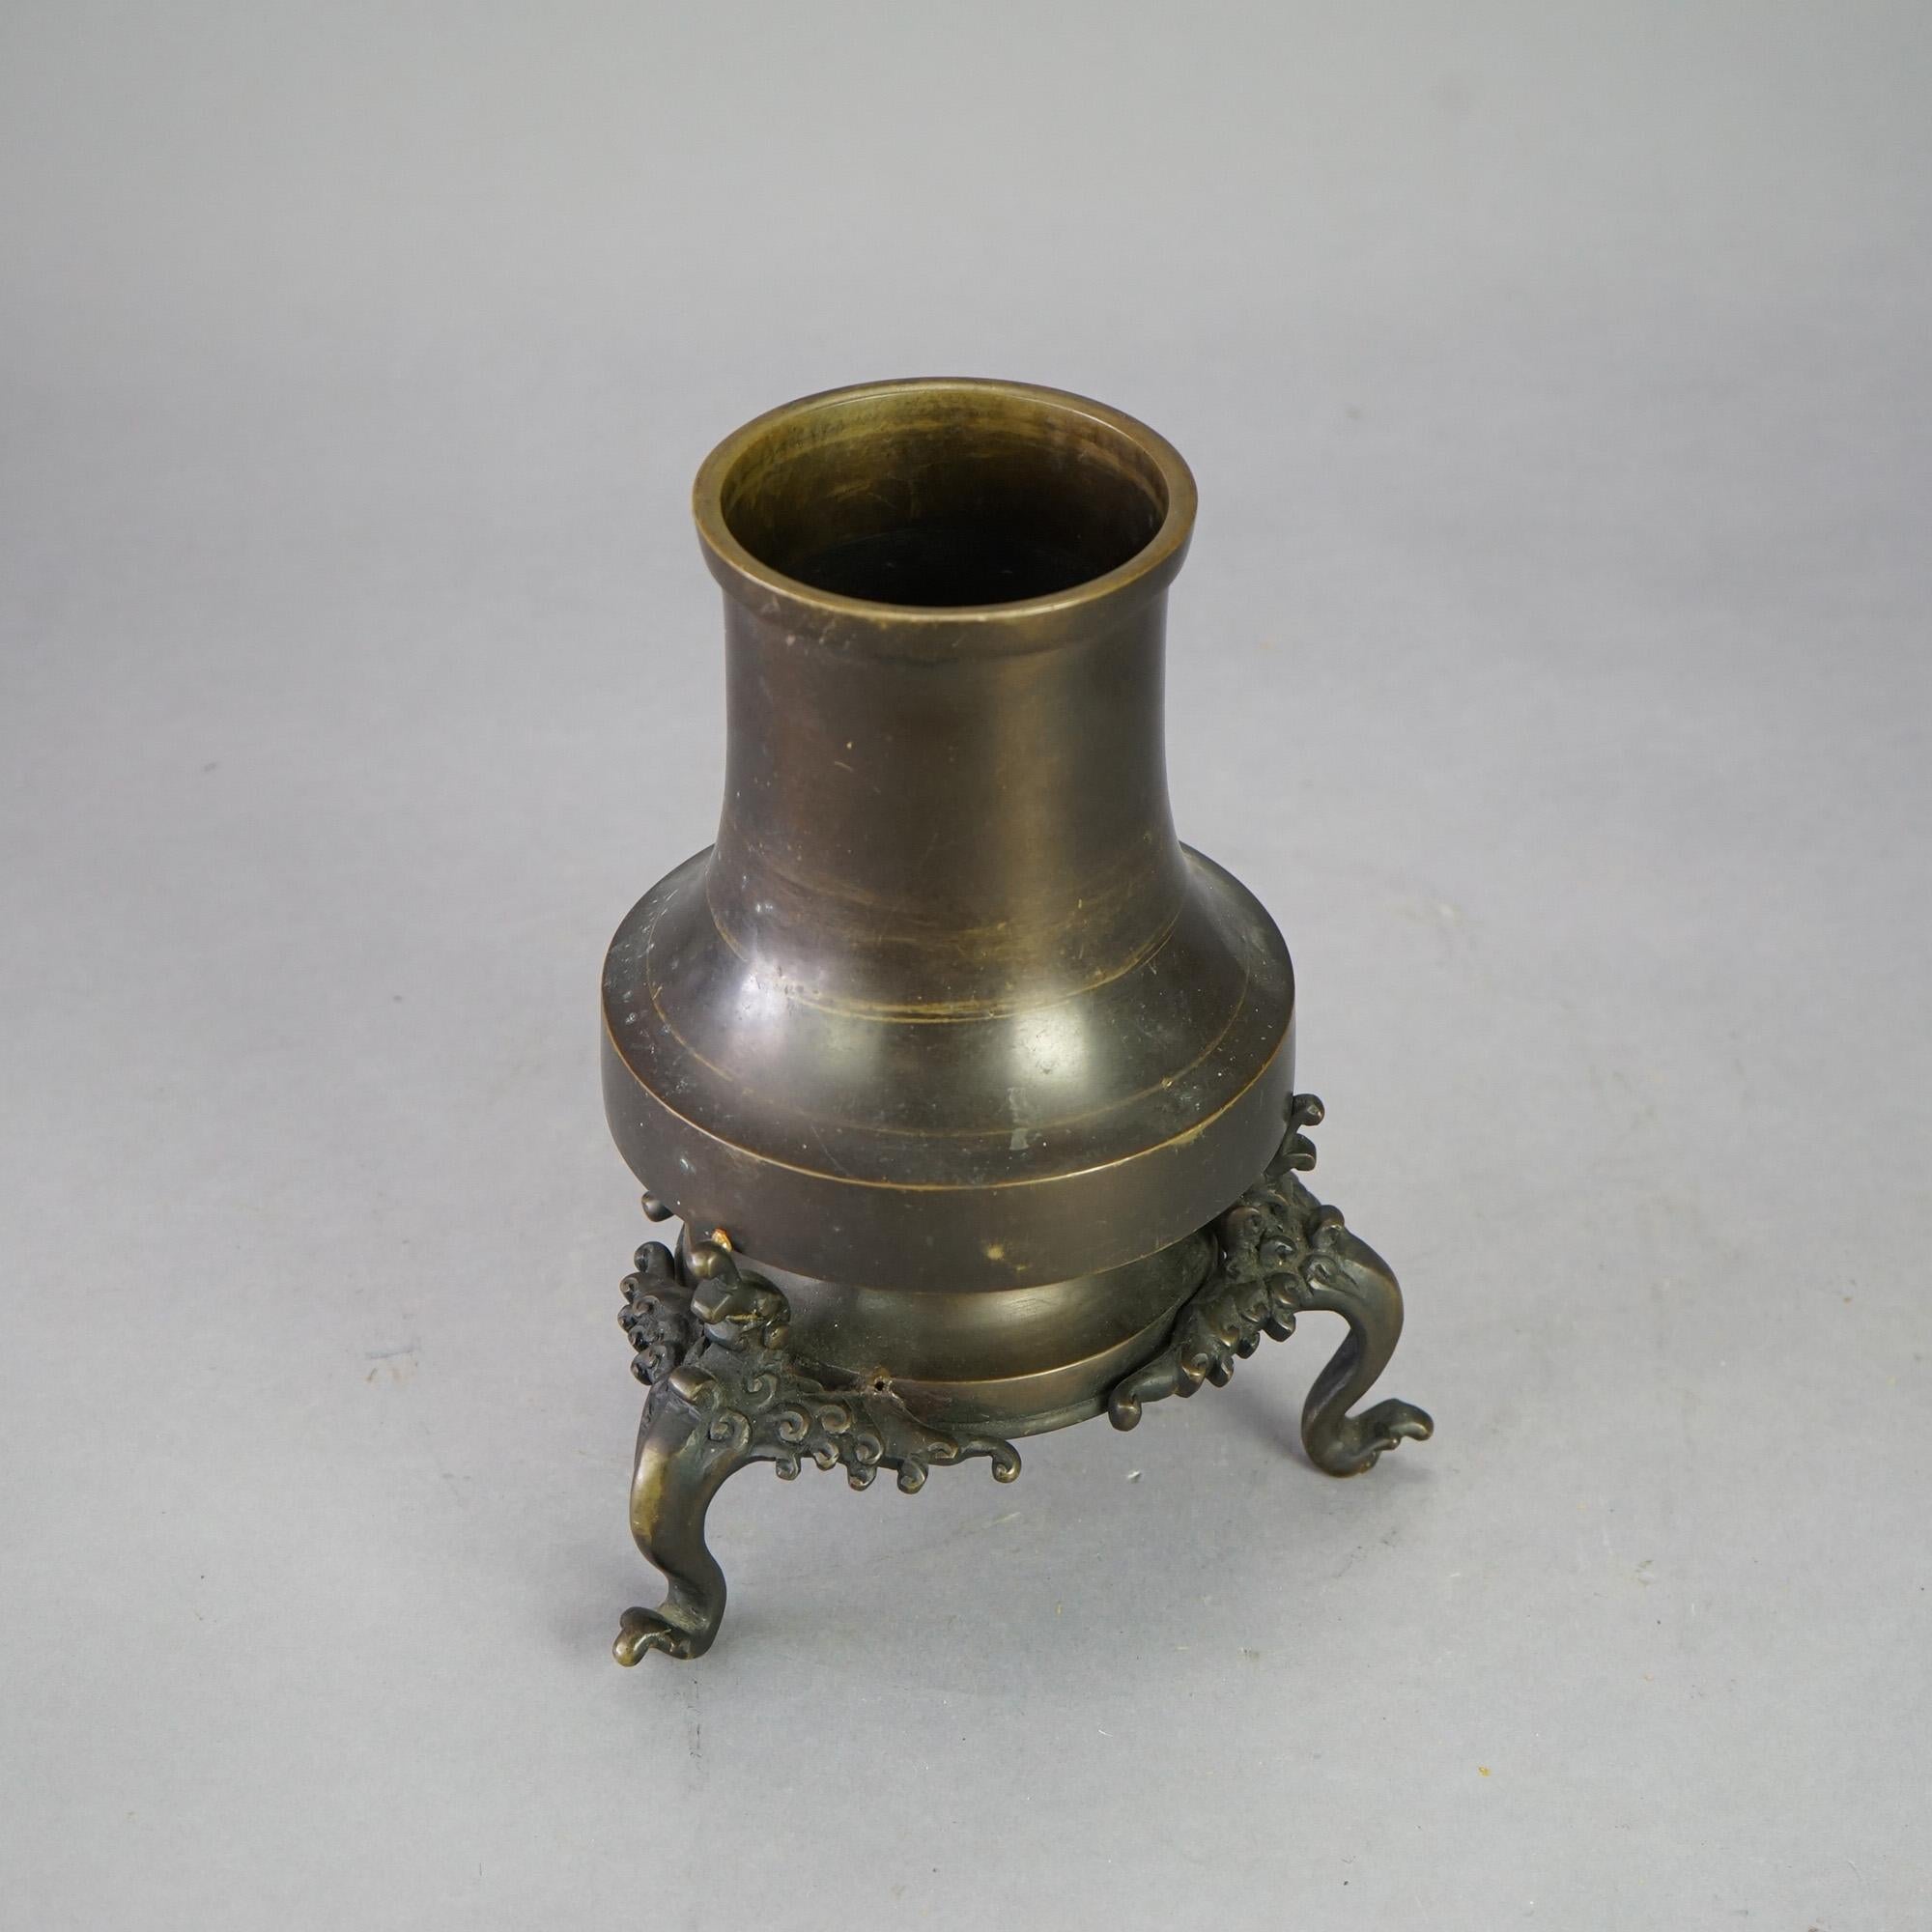 An antique oriental censer offers bronze construction in tower form on footed base having wave or cloud form elements, 19th century

Measures - 10.5